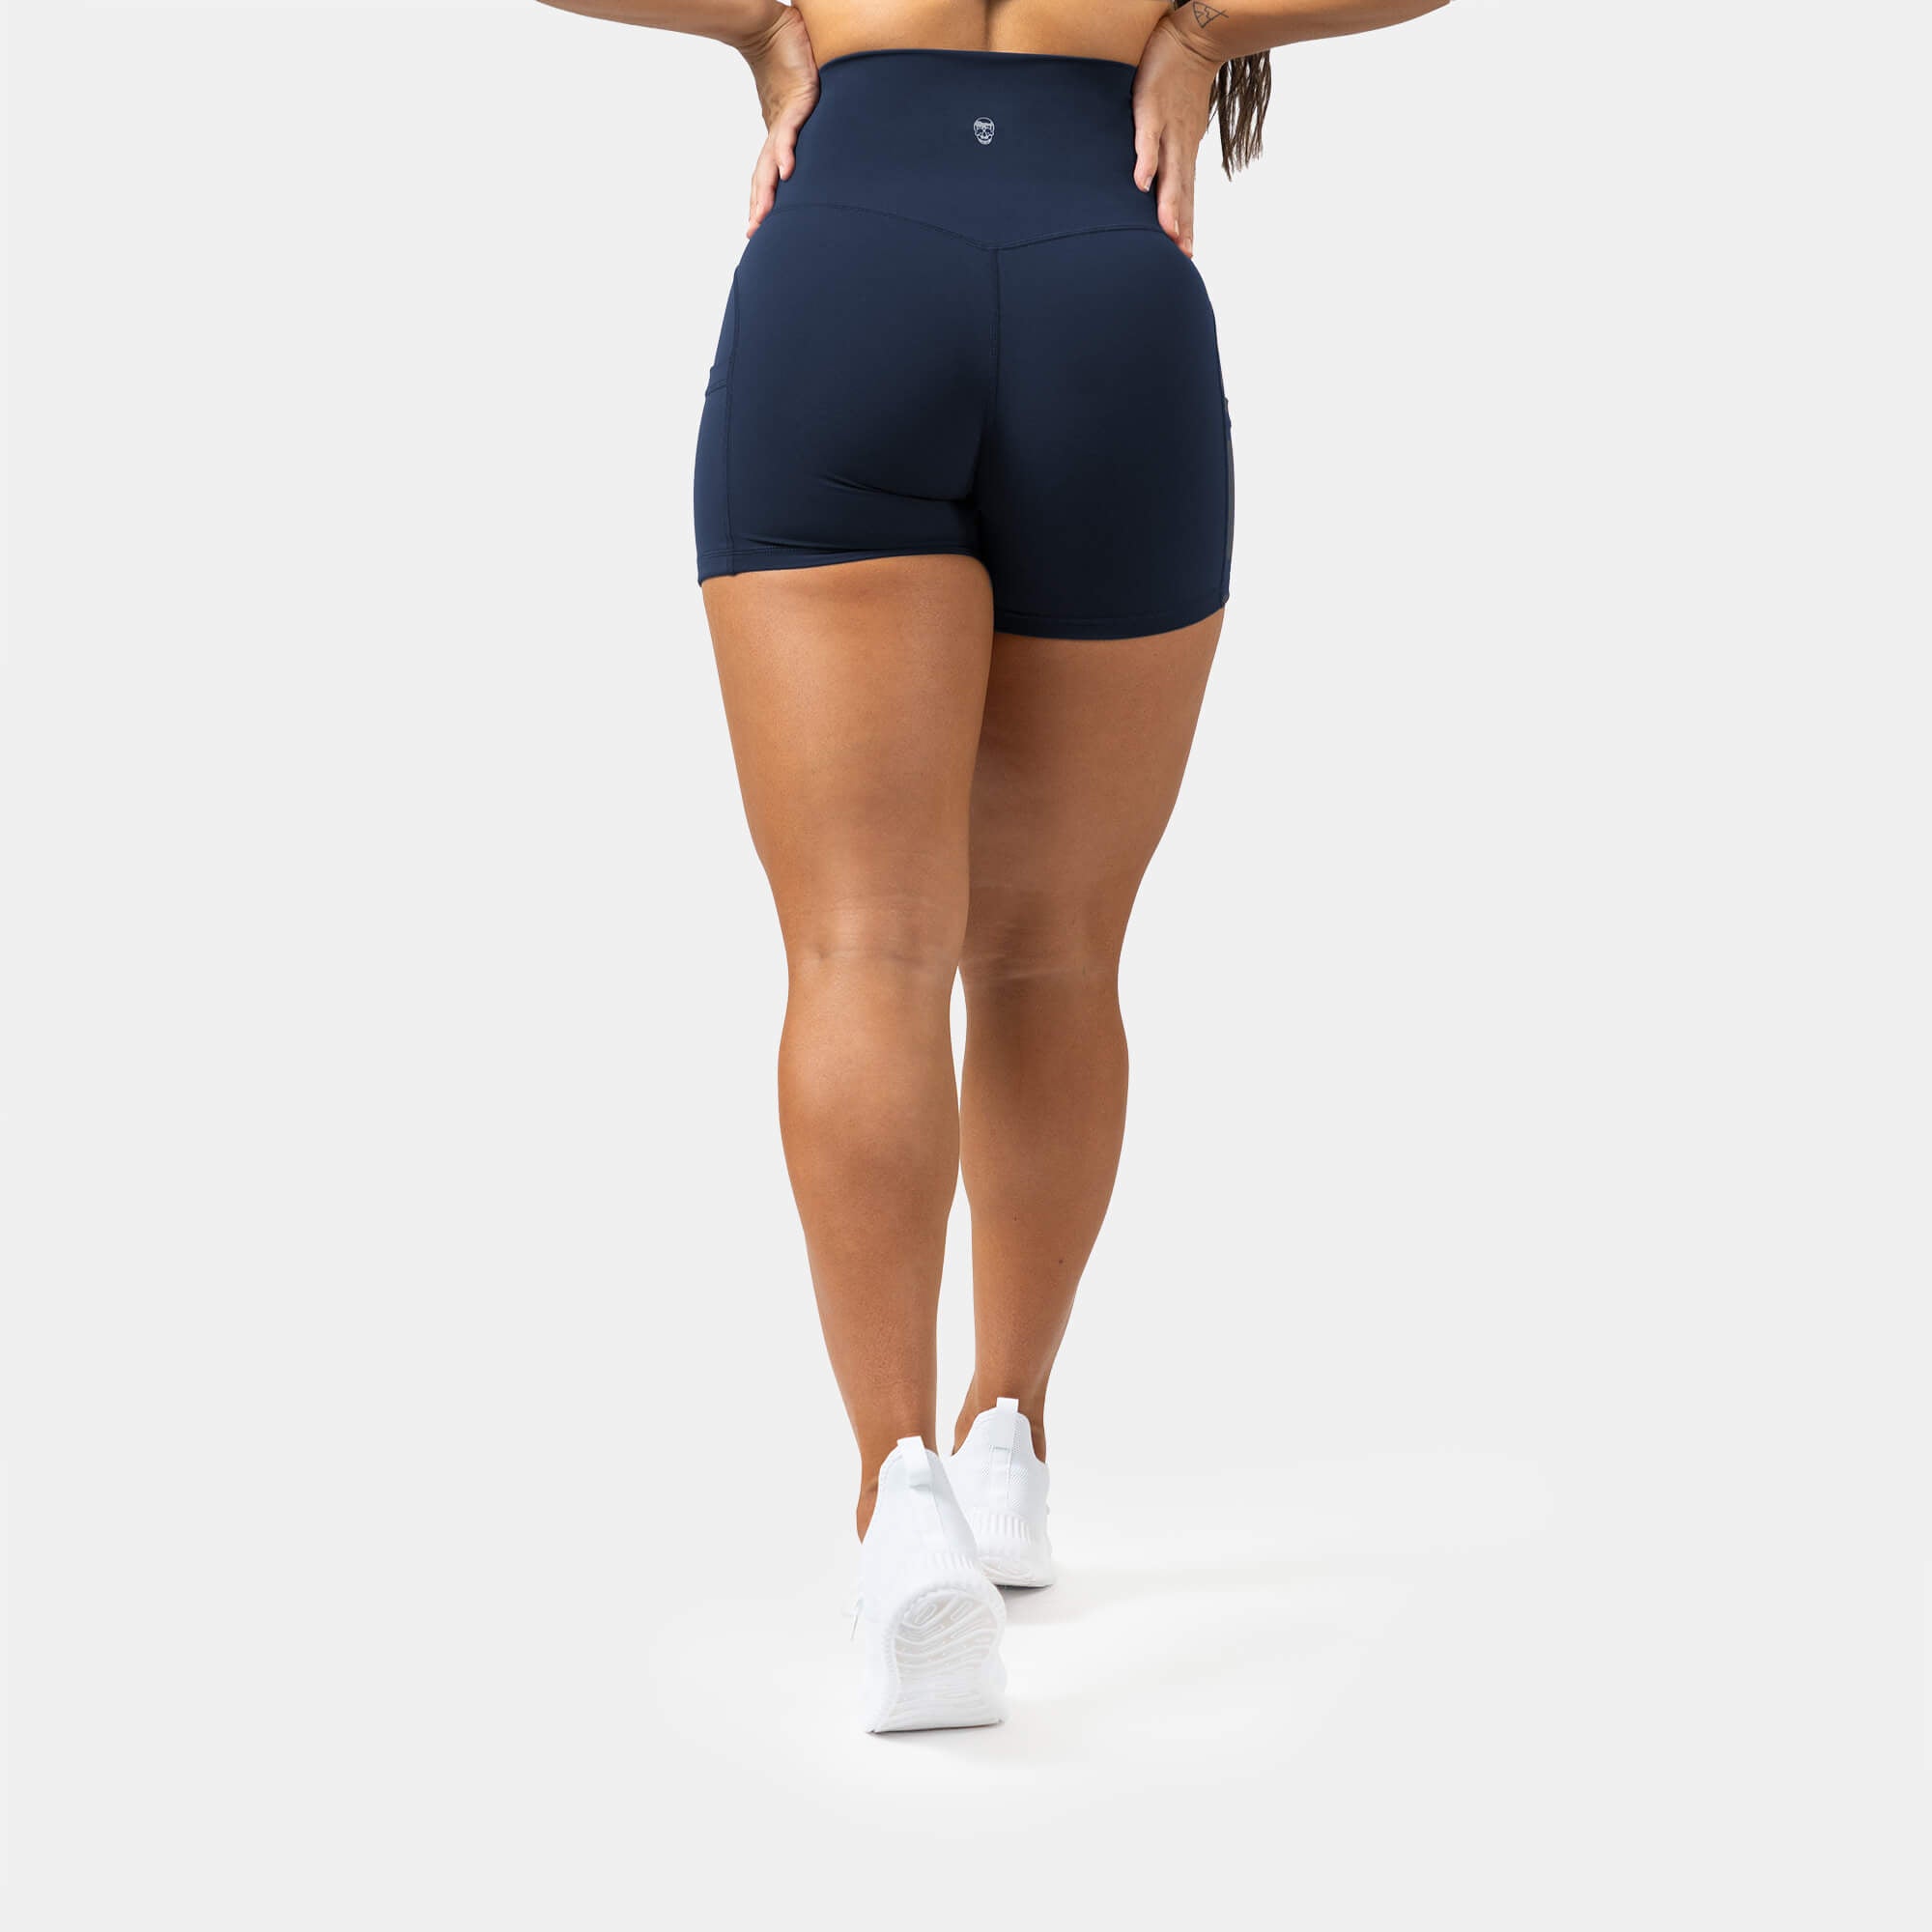 Womens Workout Shorts - Fitness & Gym Workout Shorts in US